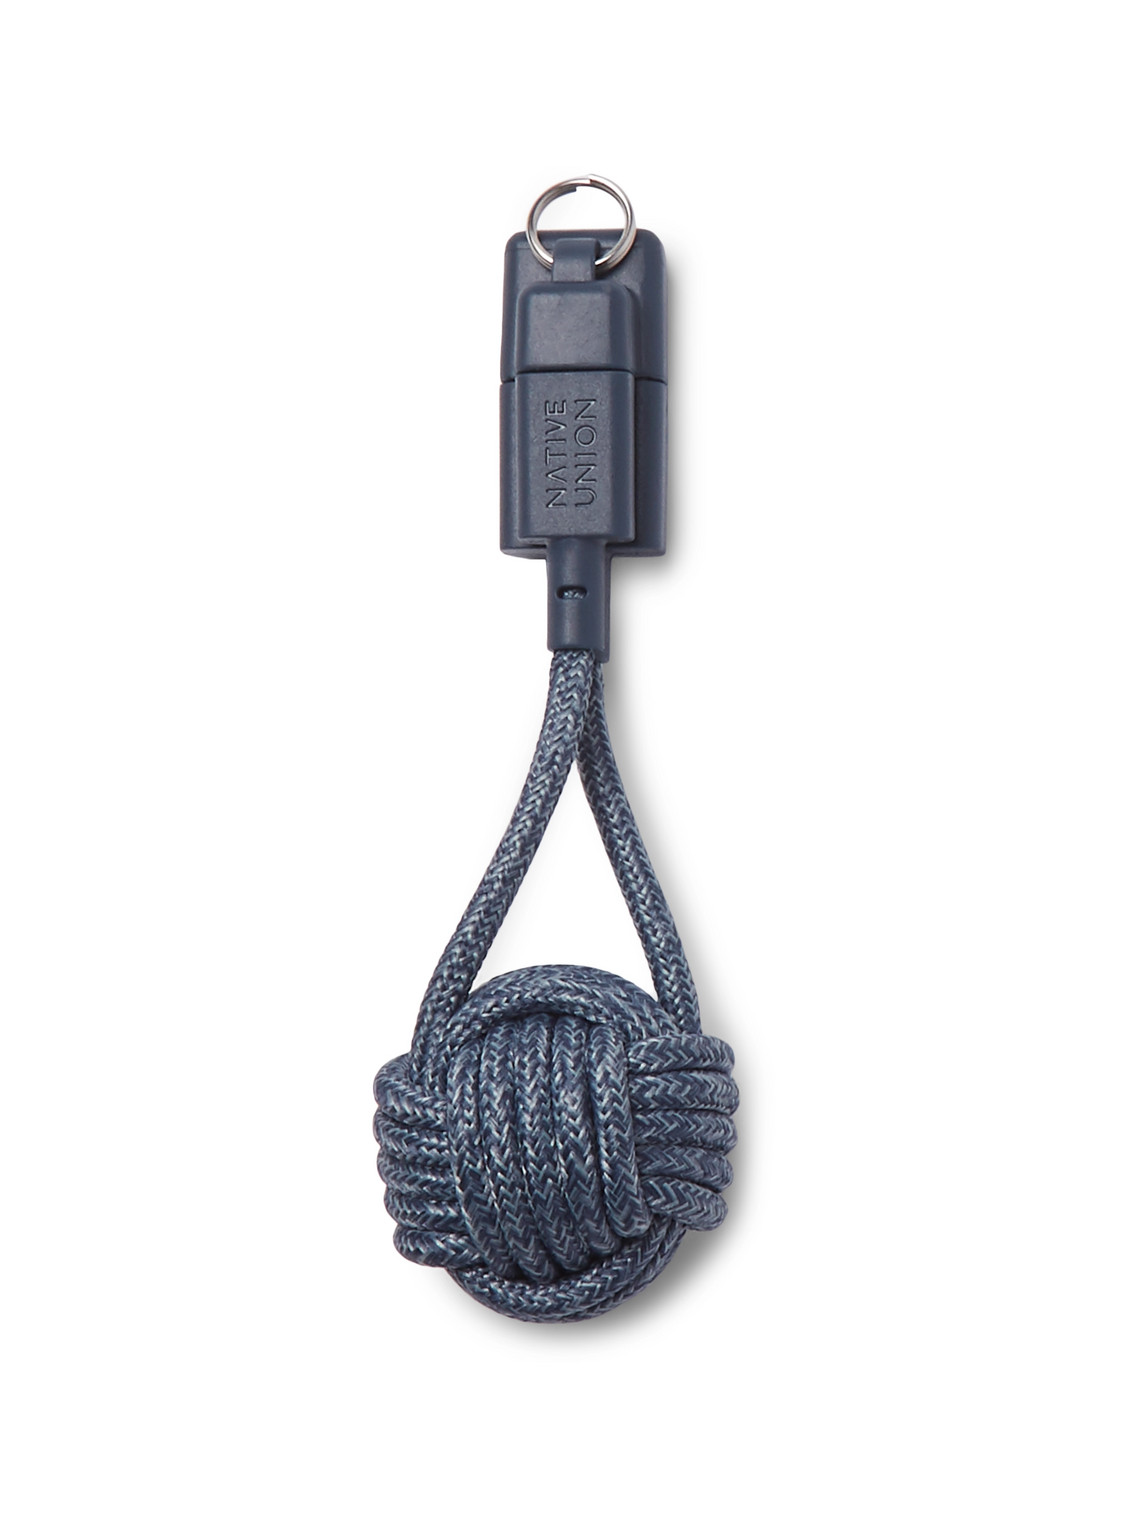 Native Union Knot Lightning Cable Key Fob In Blue